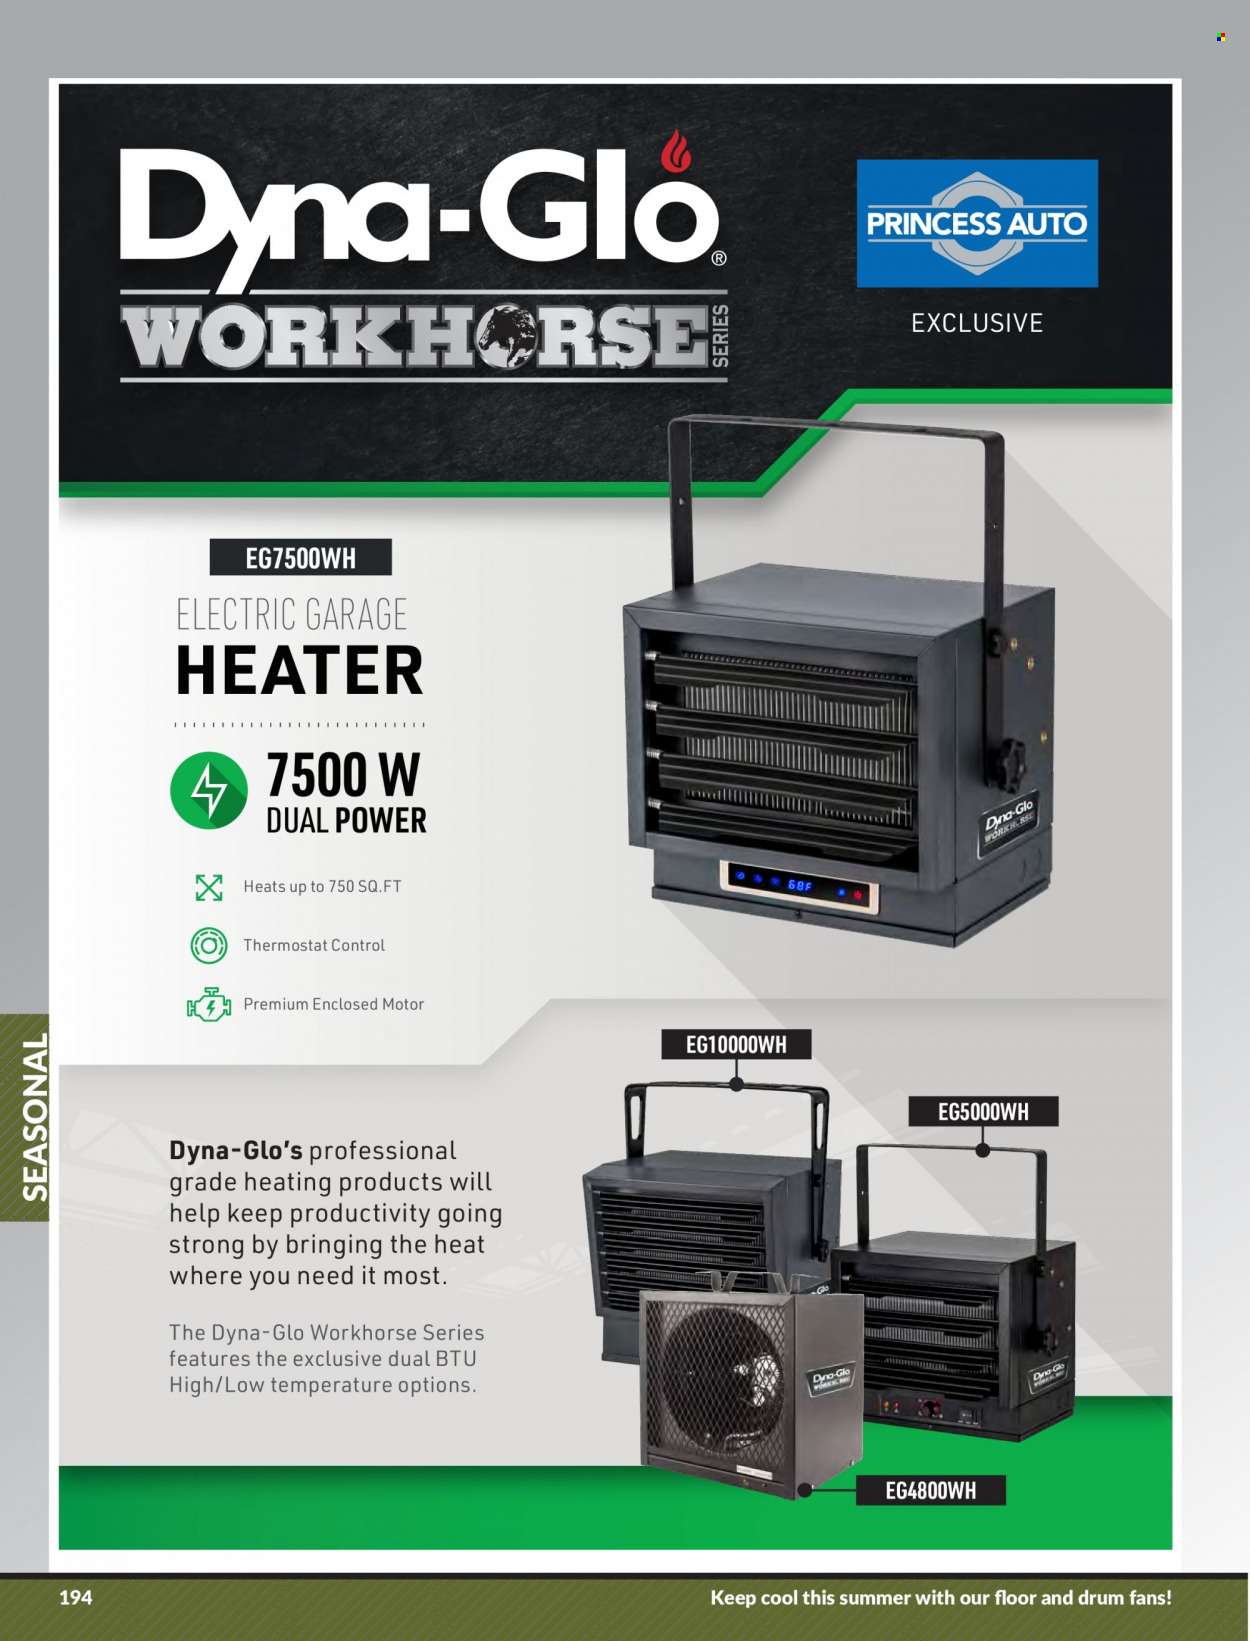 Princess Auto Flyer - Sales products - heater. Page 200.